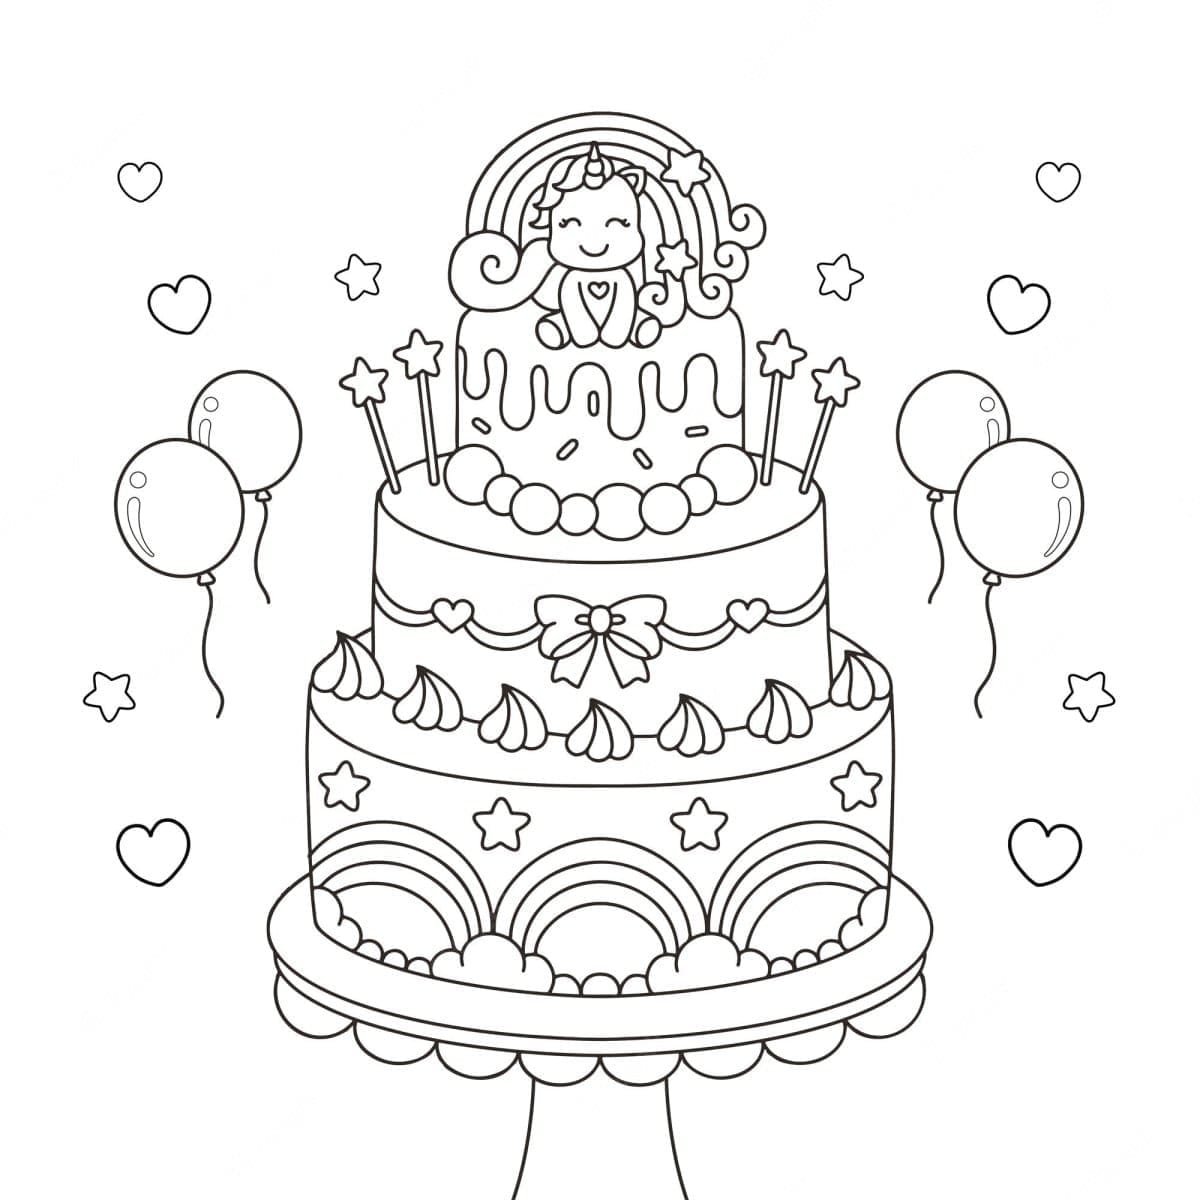 Unicorn Cake Coloring Pages - 6 Free Printable Coloring Pages (2021) | Unicorn  coloring pages, Mermaid coloring pages, Cupcake coloring pages